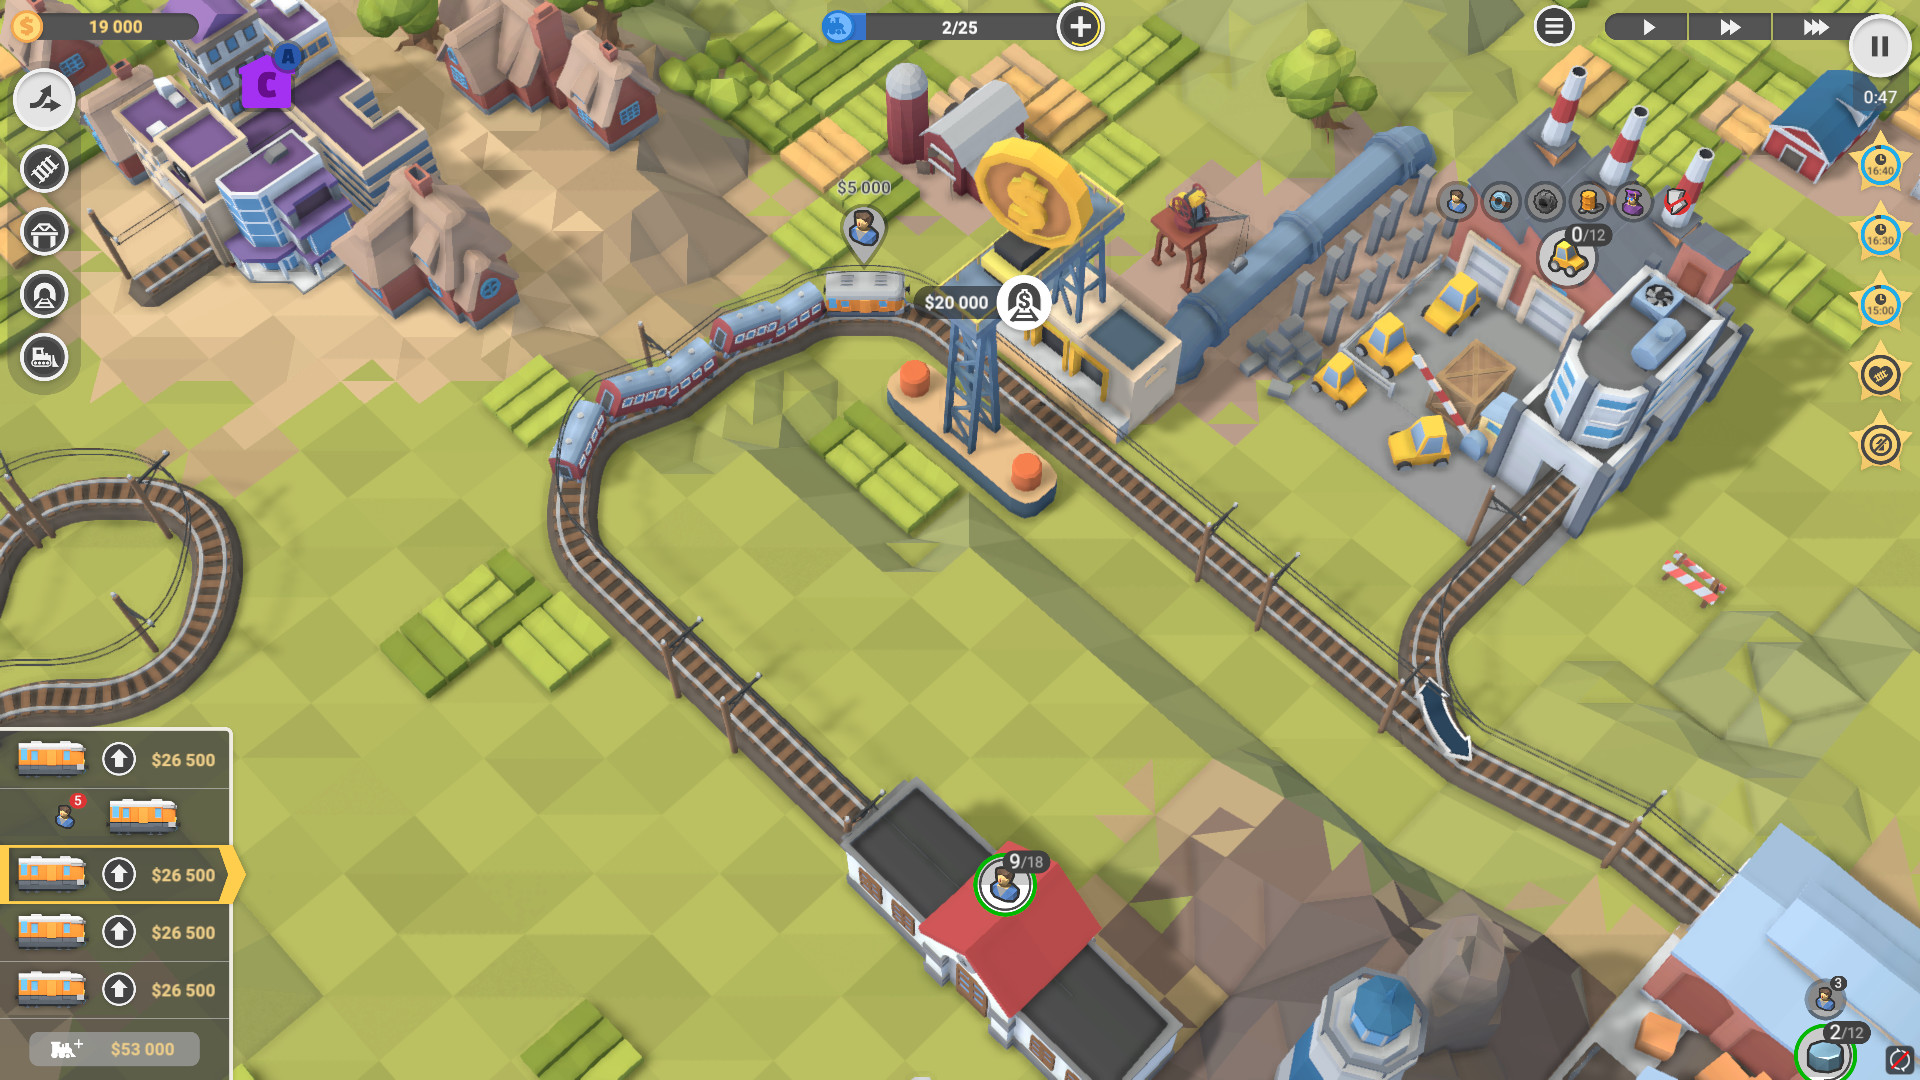 Train Valley 2 for ios instal free